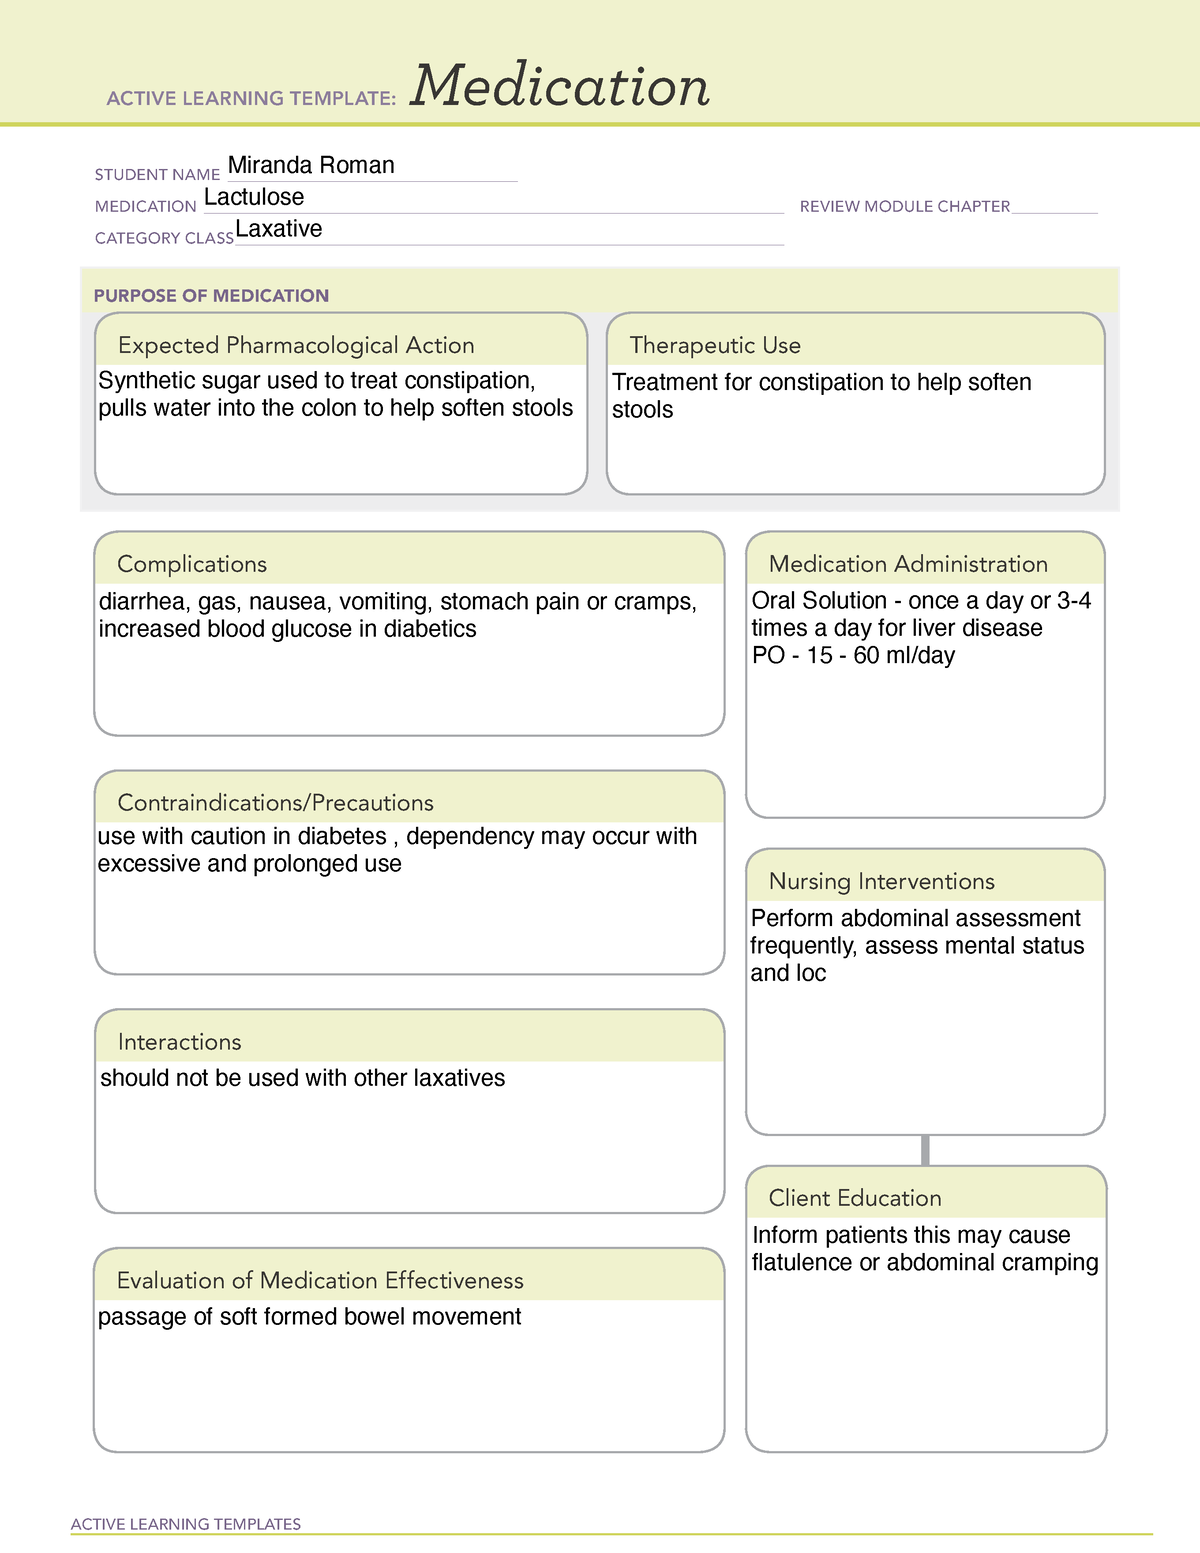 Lactulose Med Template ACTIVE LEARNING TEMPLATES Medication STUDENT